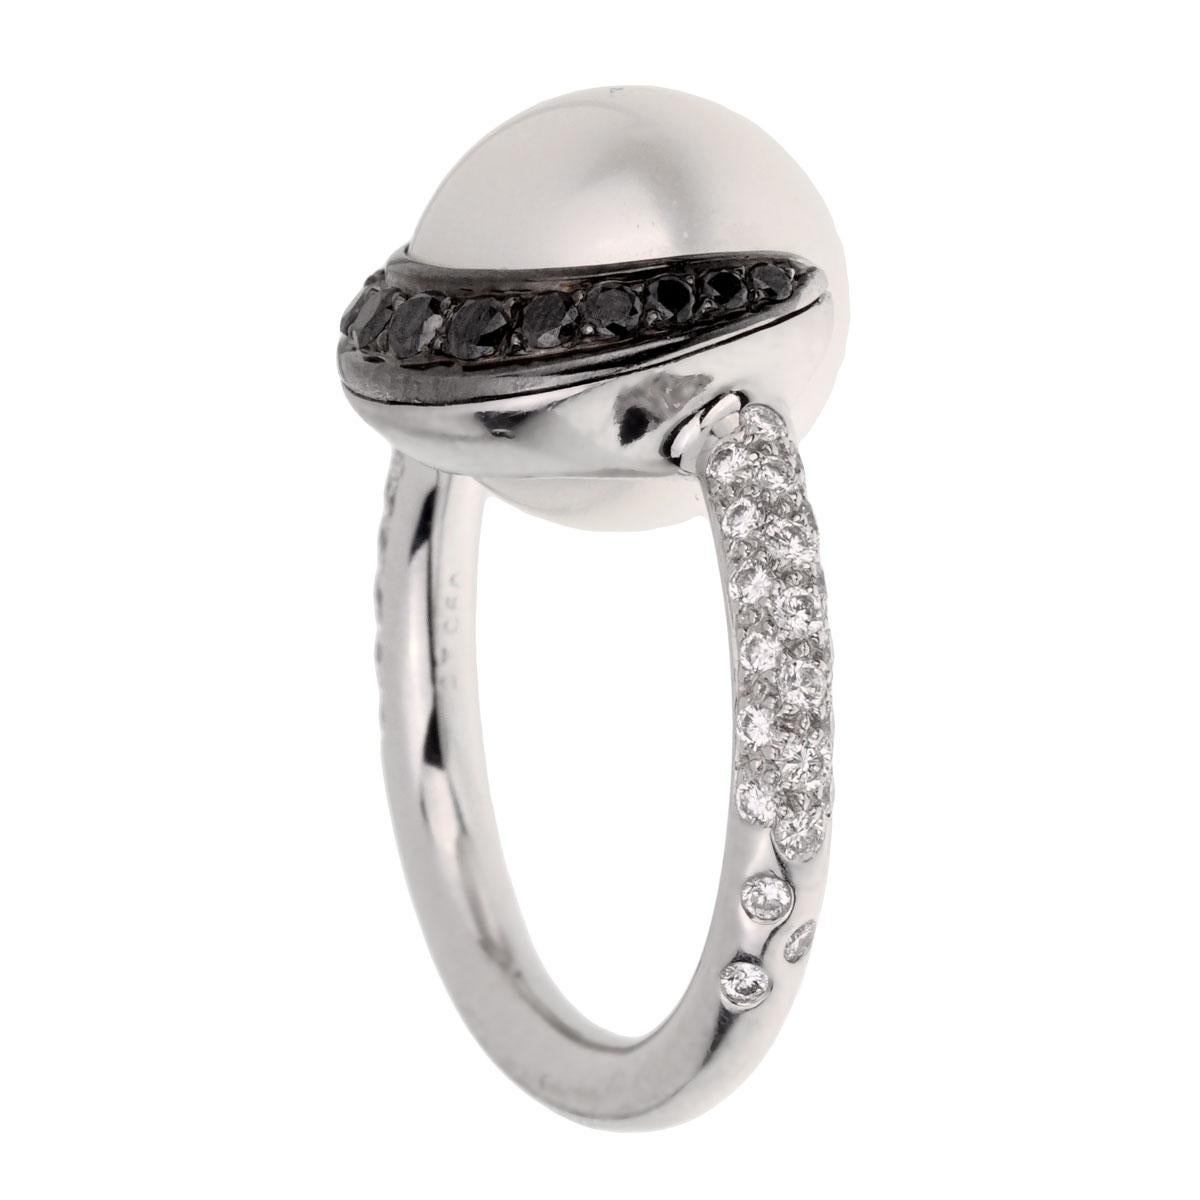 A fabulous Chanel diamond ring circa 2000s adorned with round brilliant cut diamonds, and round brilliant cut diamonds encasing the pearl set in platinum.

Size 6 Resizeable